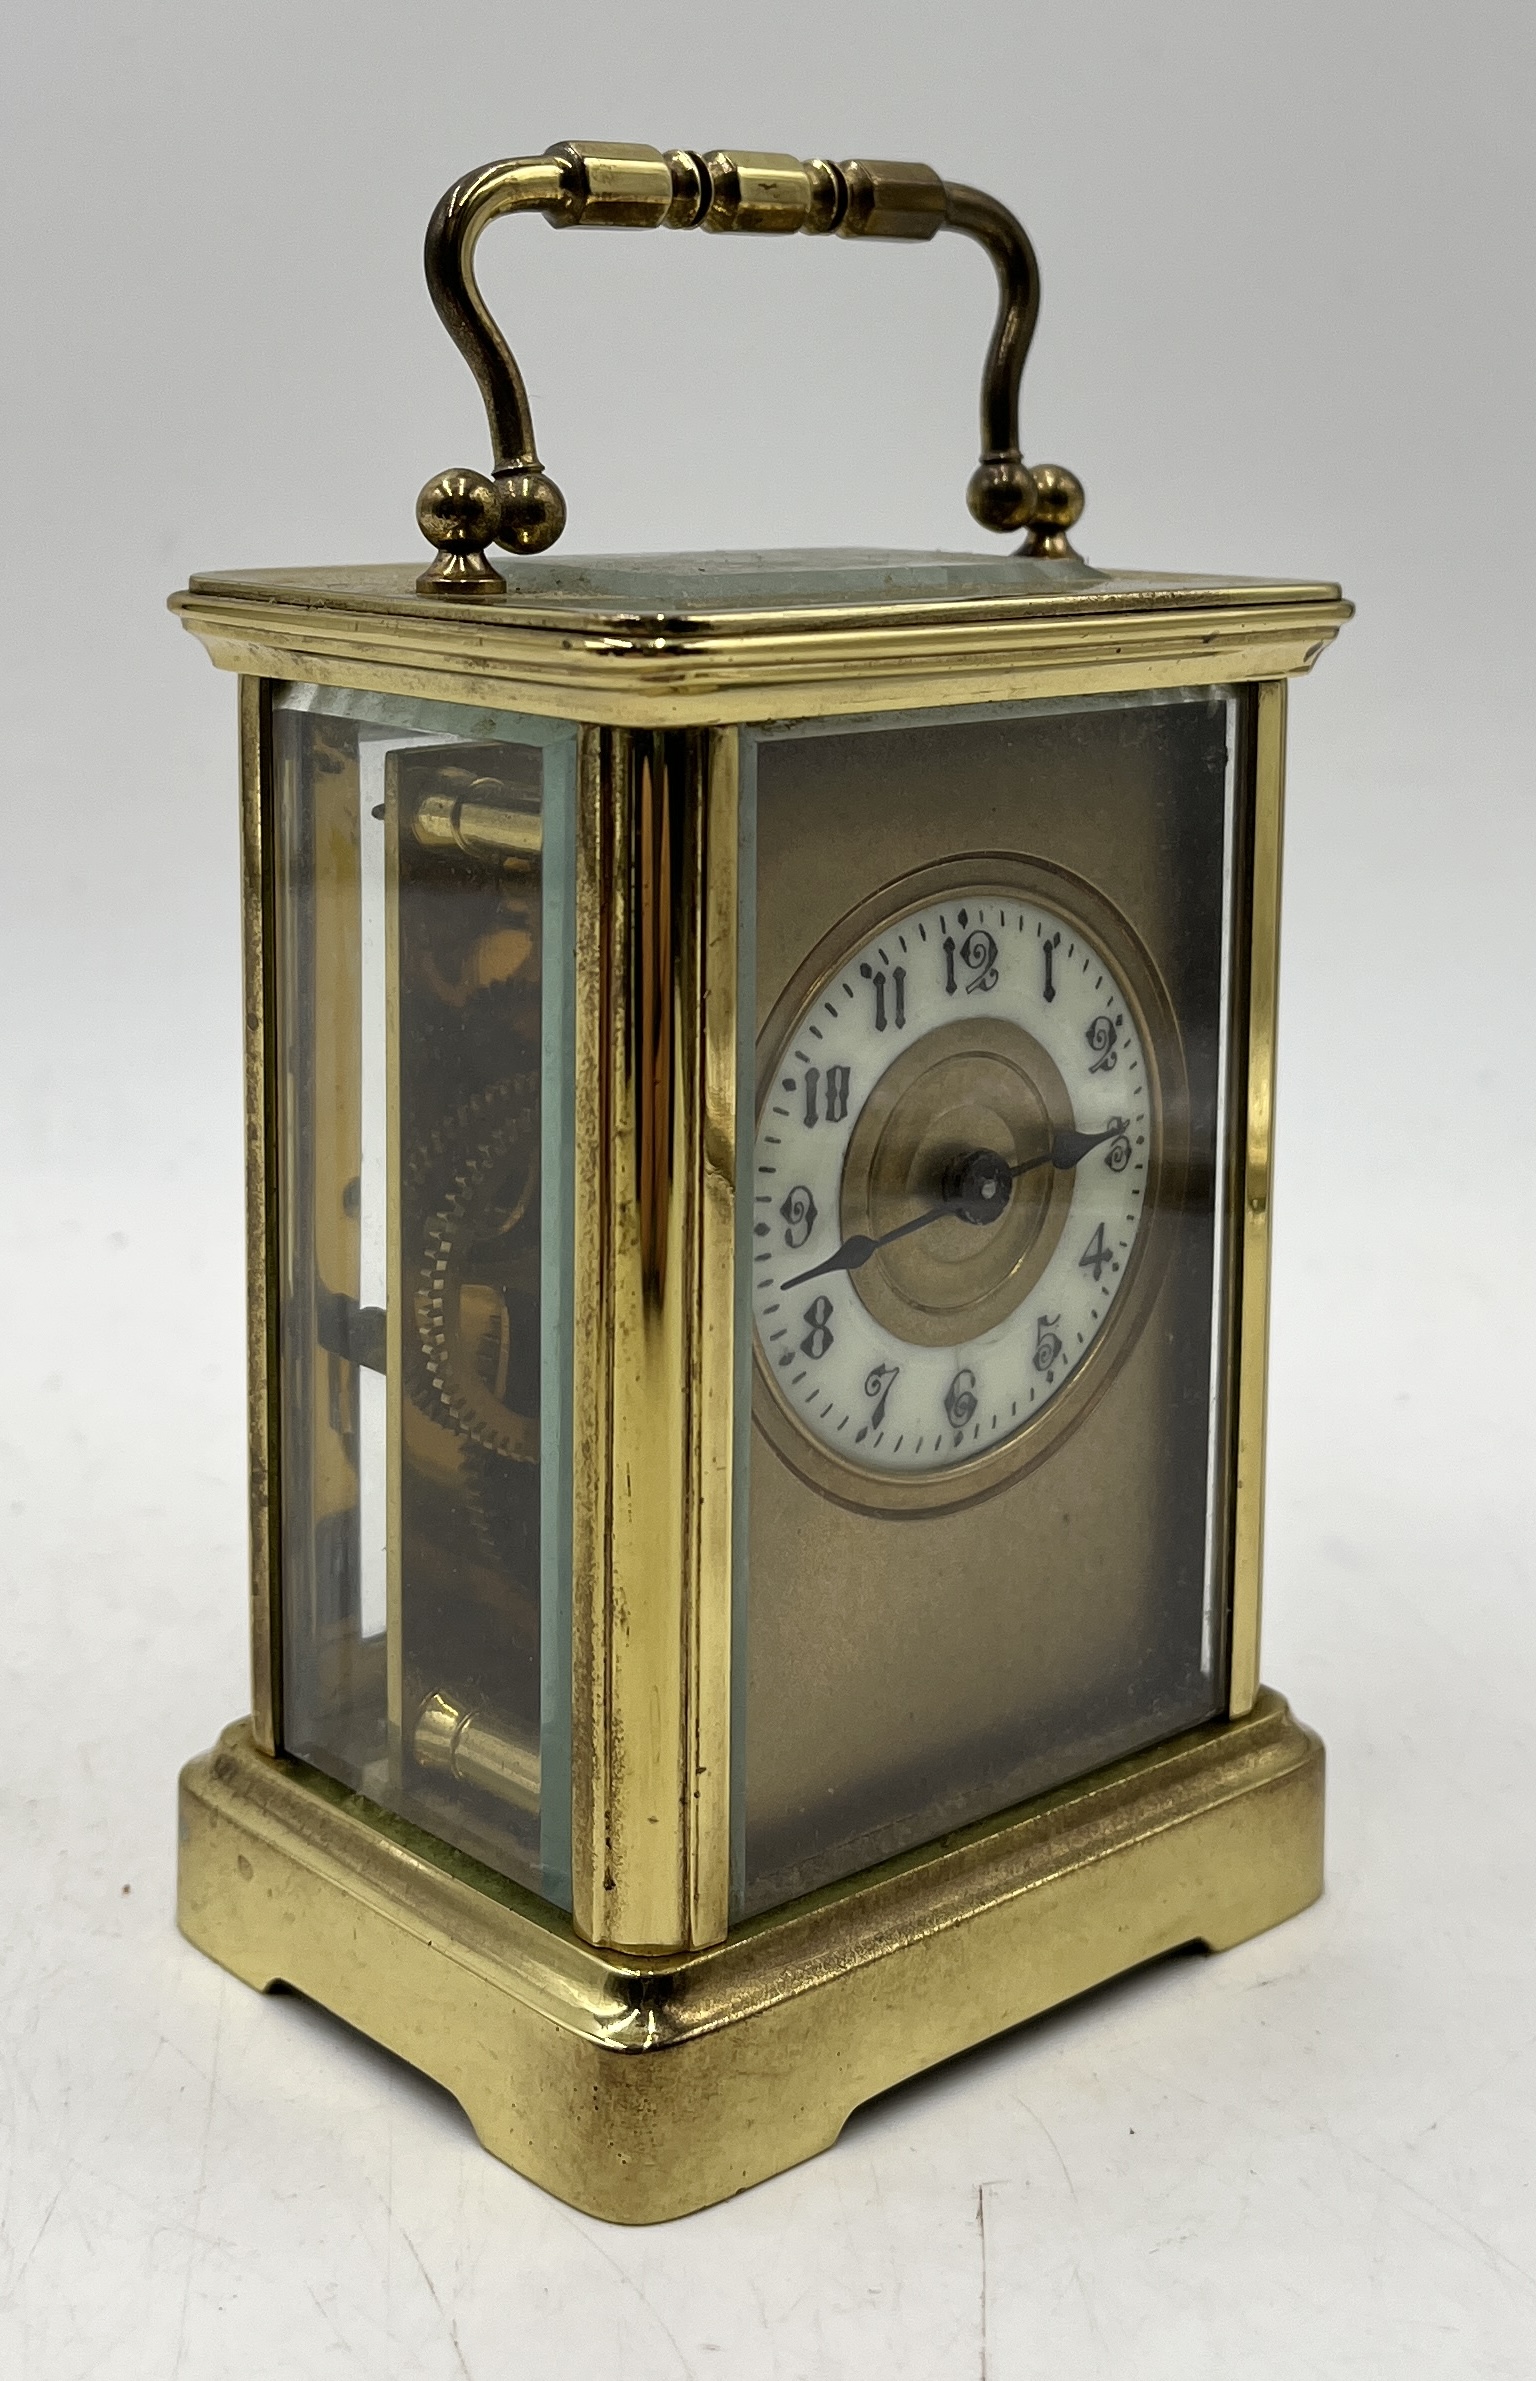 A brass carriage clock with porcelain dial and Arabic numerals - Image 2 of 4